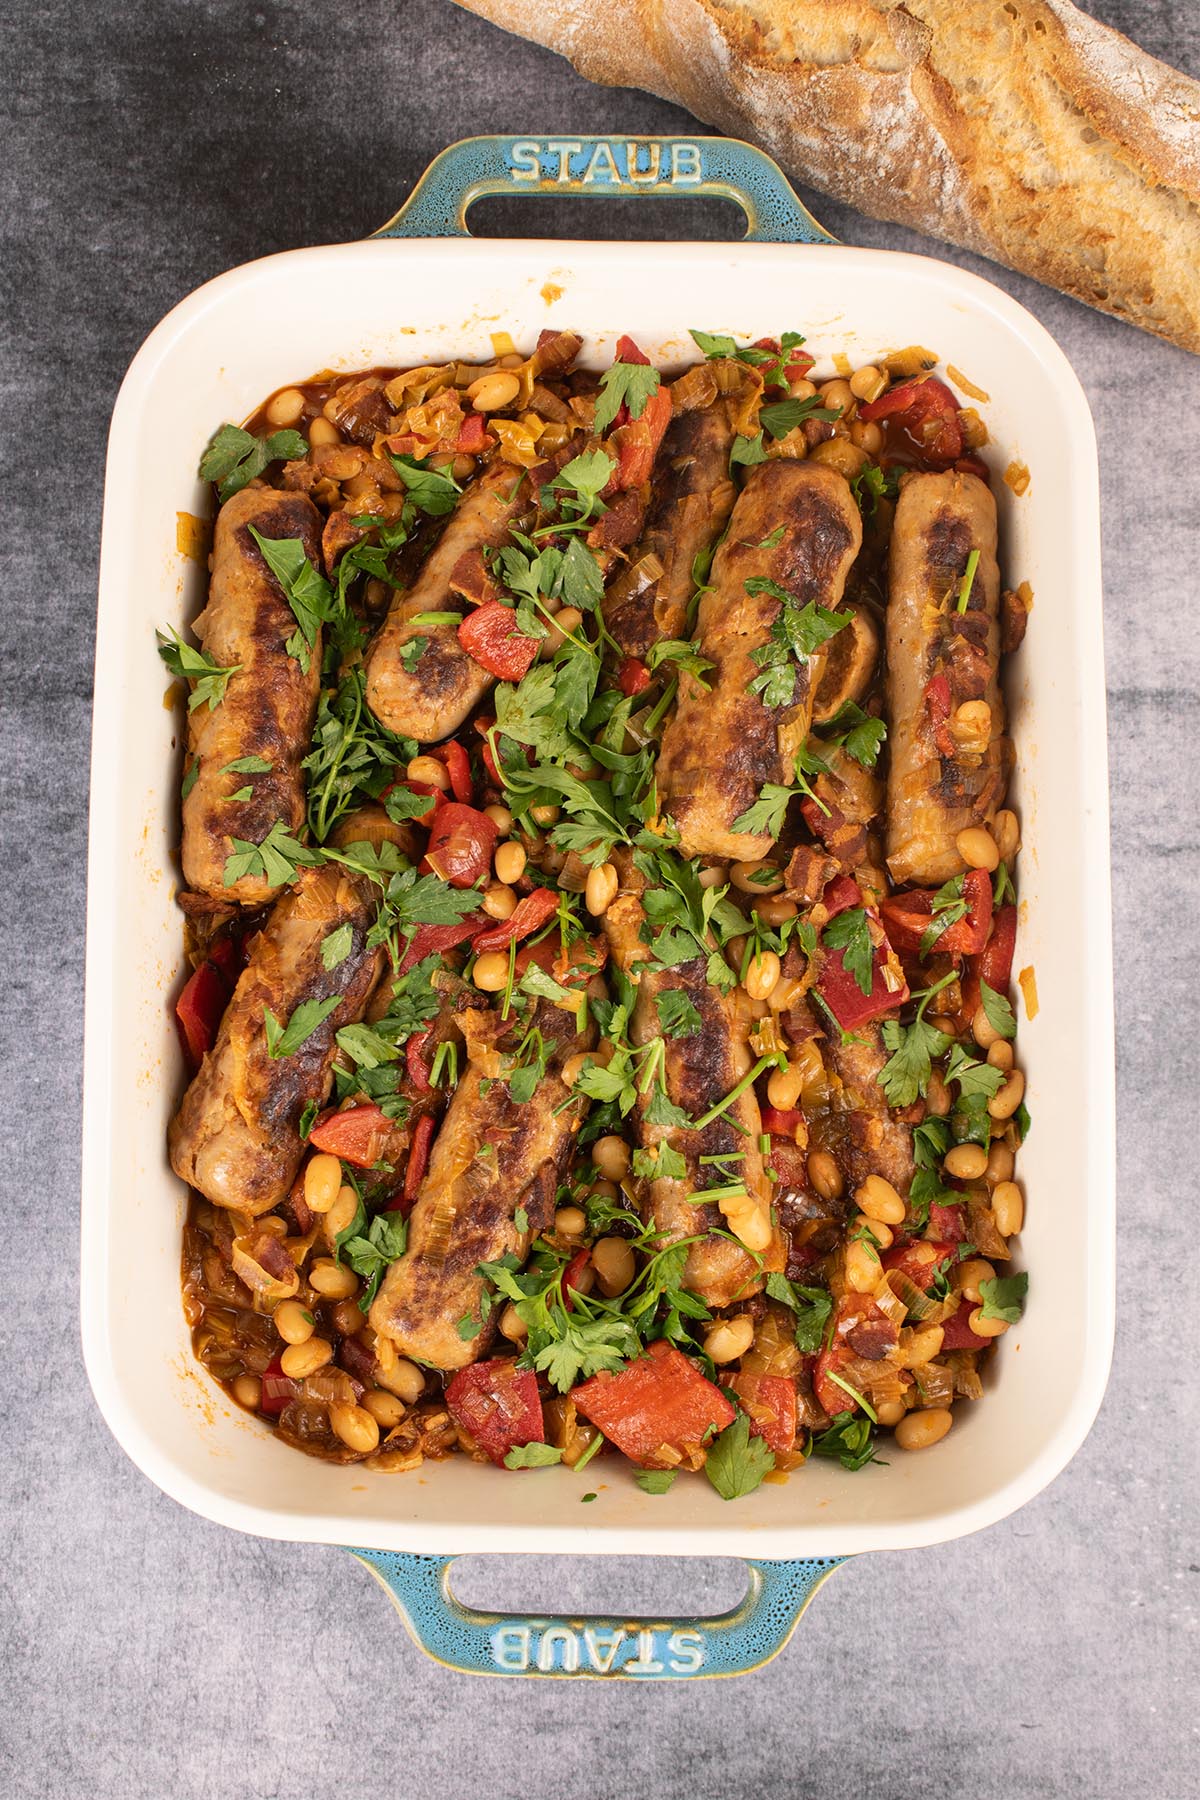 Sausage casserole in rectangle dish with baguette in background